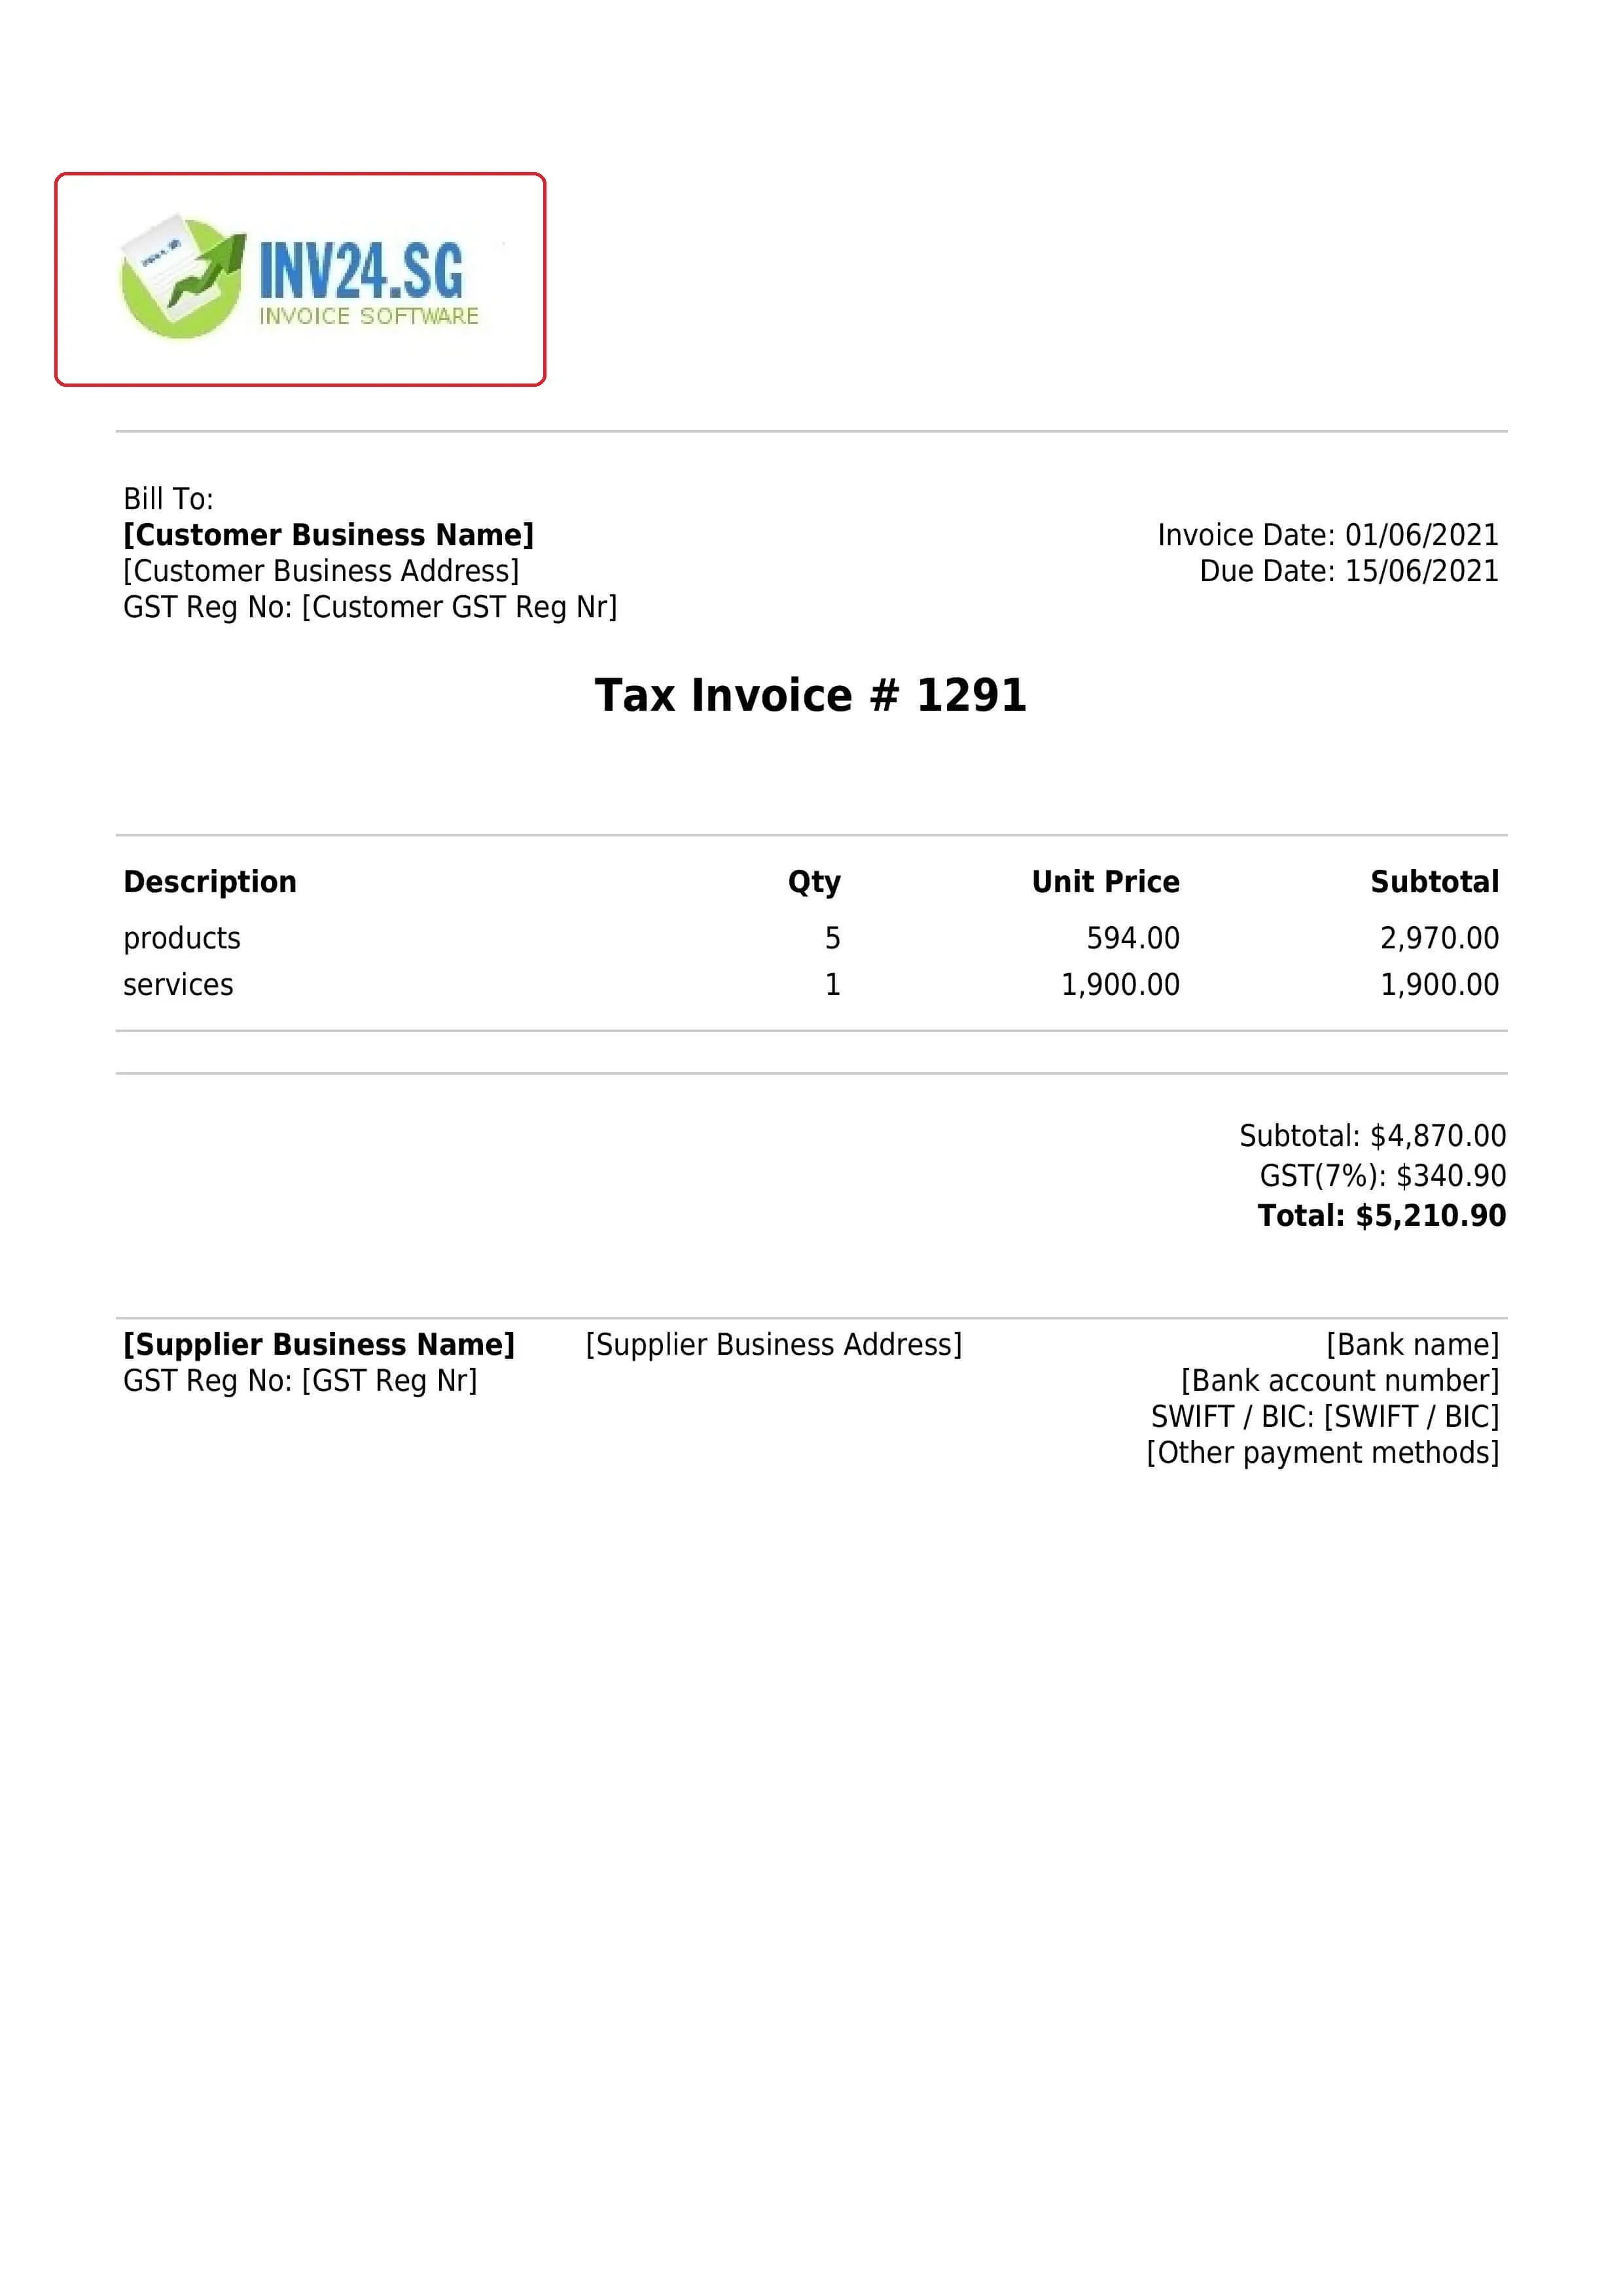 branded invoice with logo